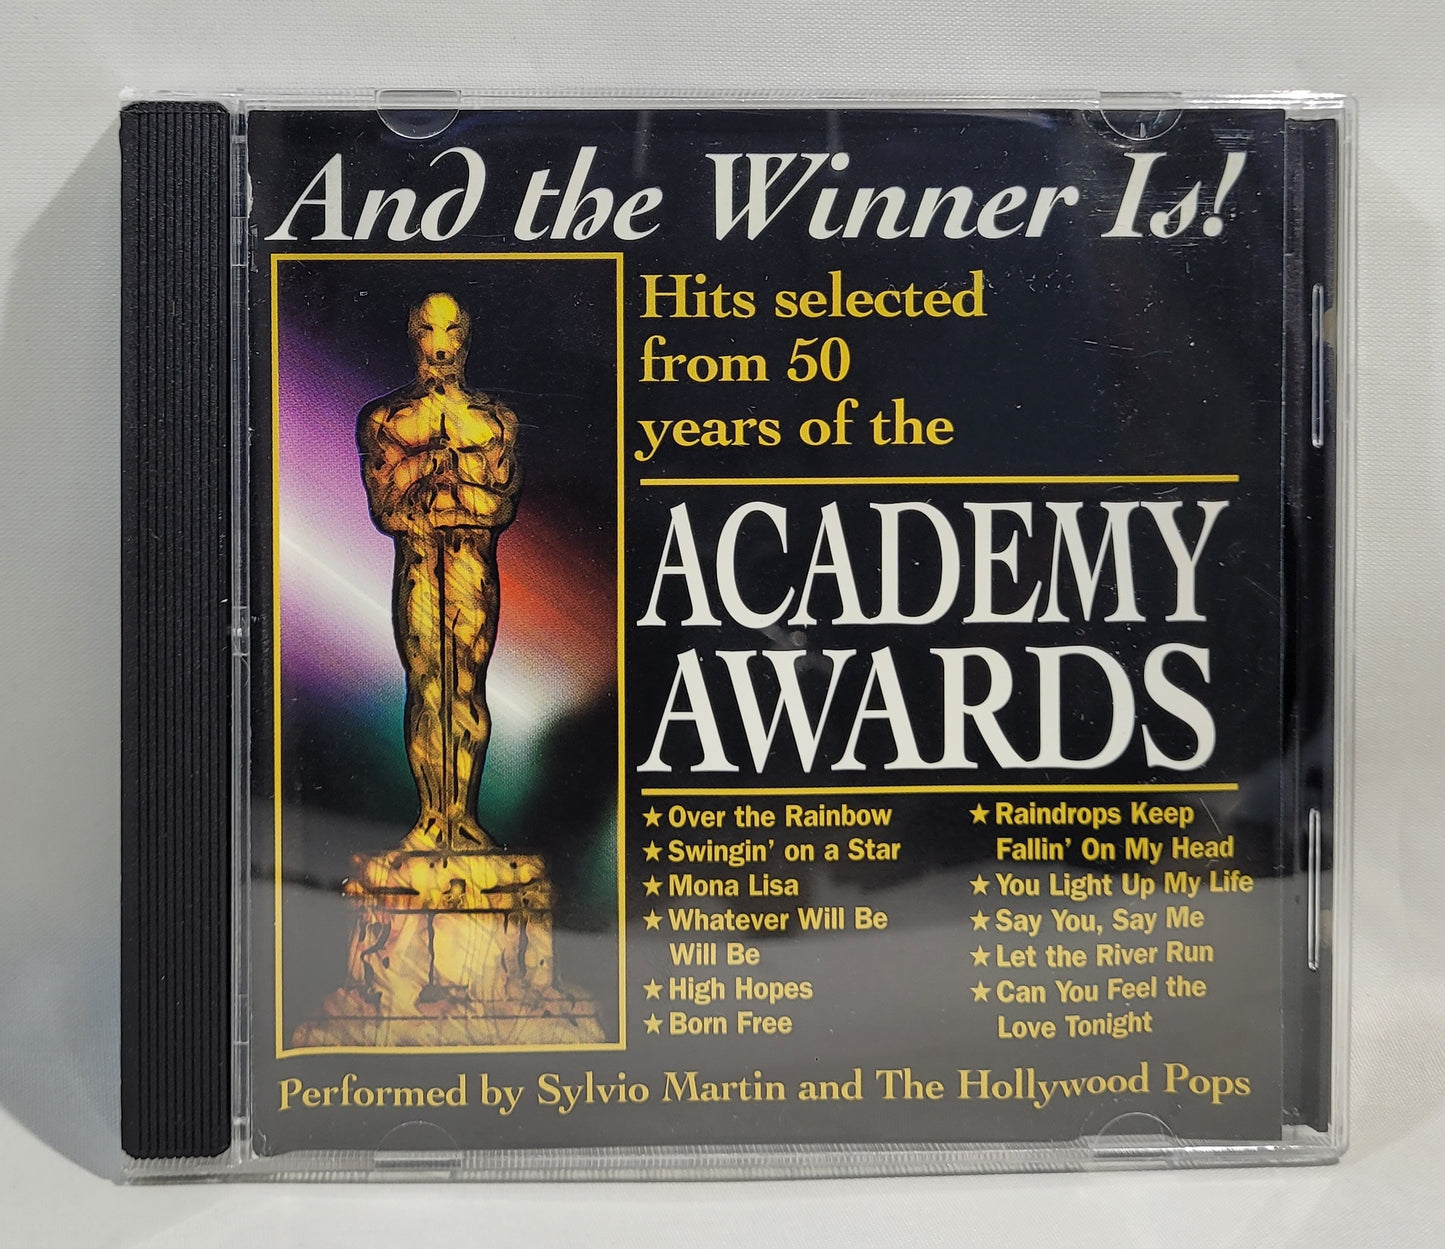 Sylvio Martin and The Hollywood Pops - And the Winner Is! [CD]